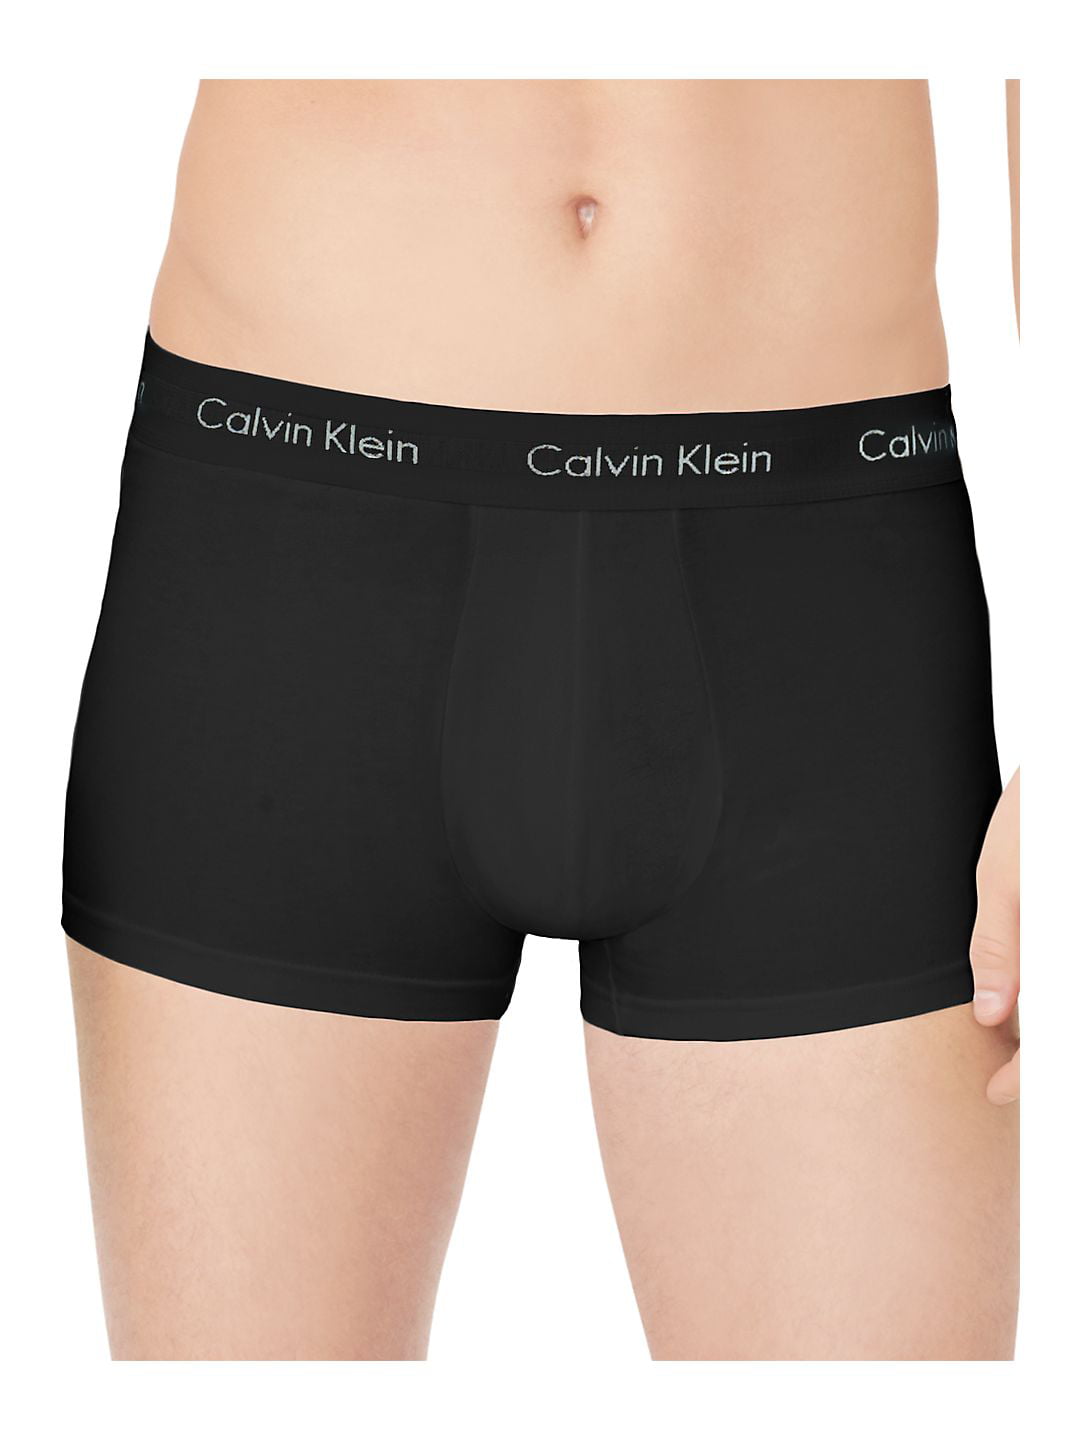 Productive Airing every day Calvin Klein Cotton Stretch Low Rise Austria, SAVE 40% - aveclumiere.com